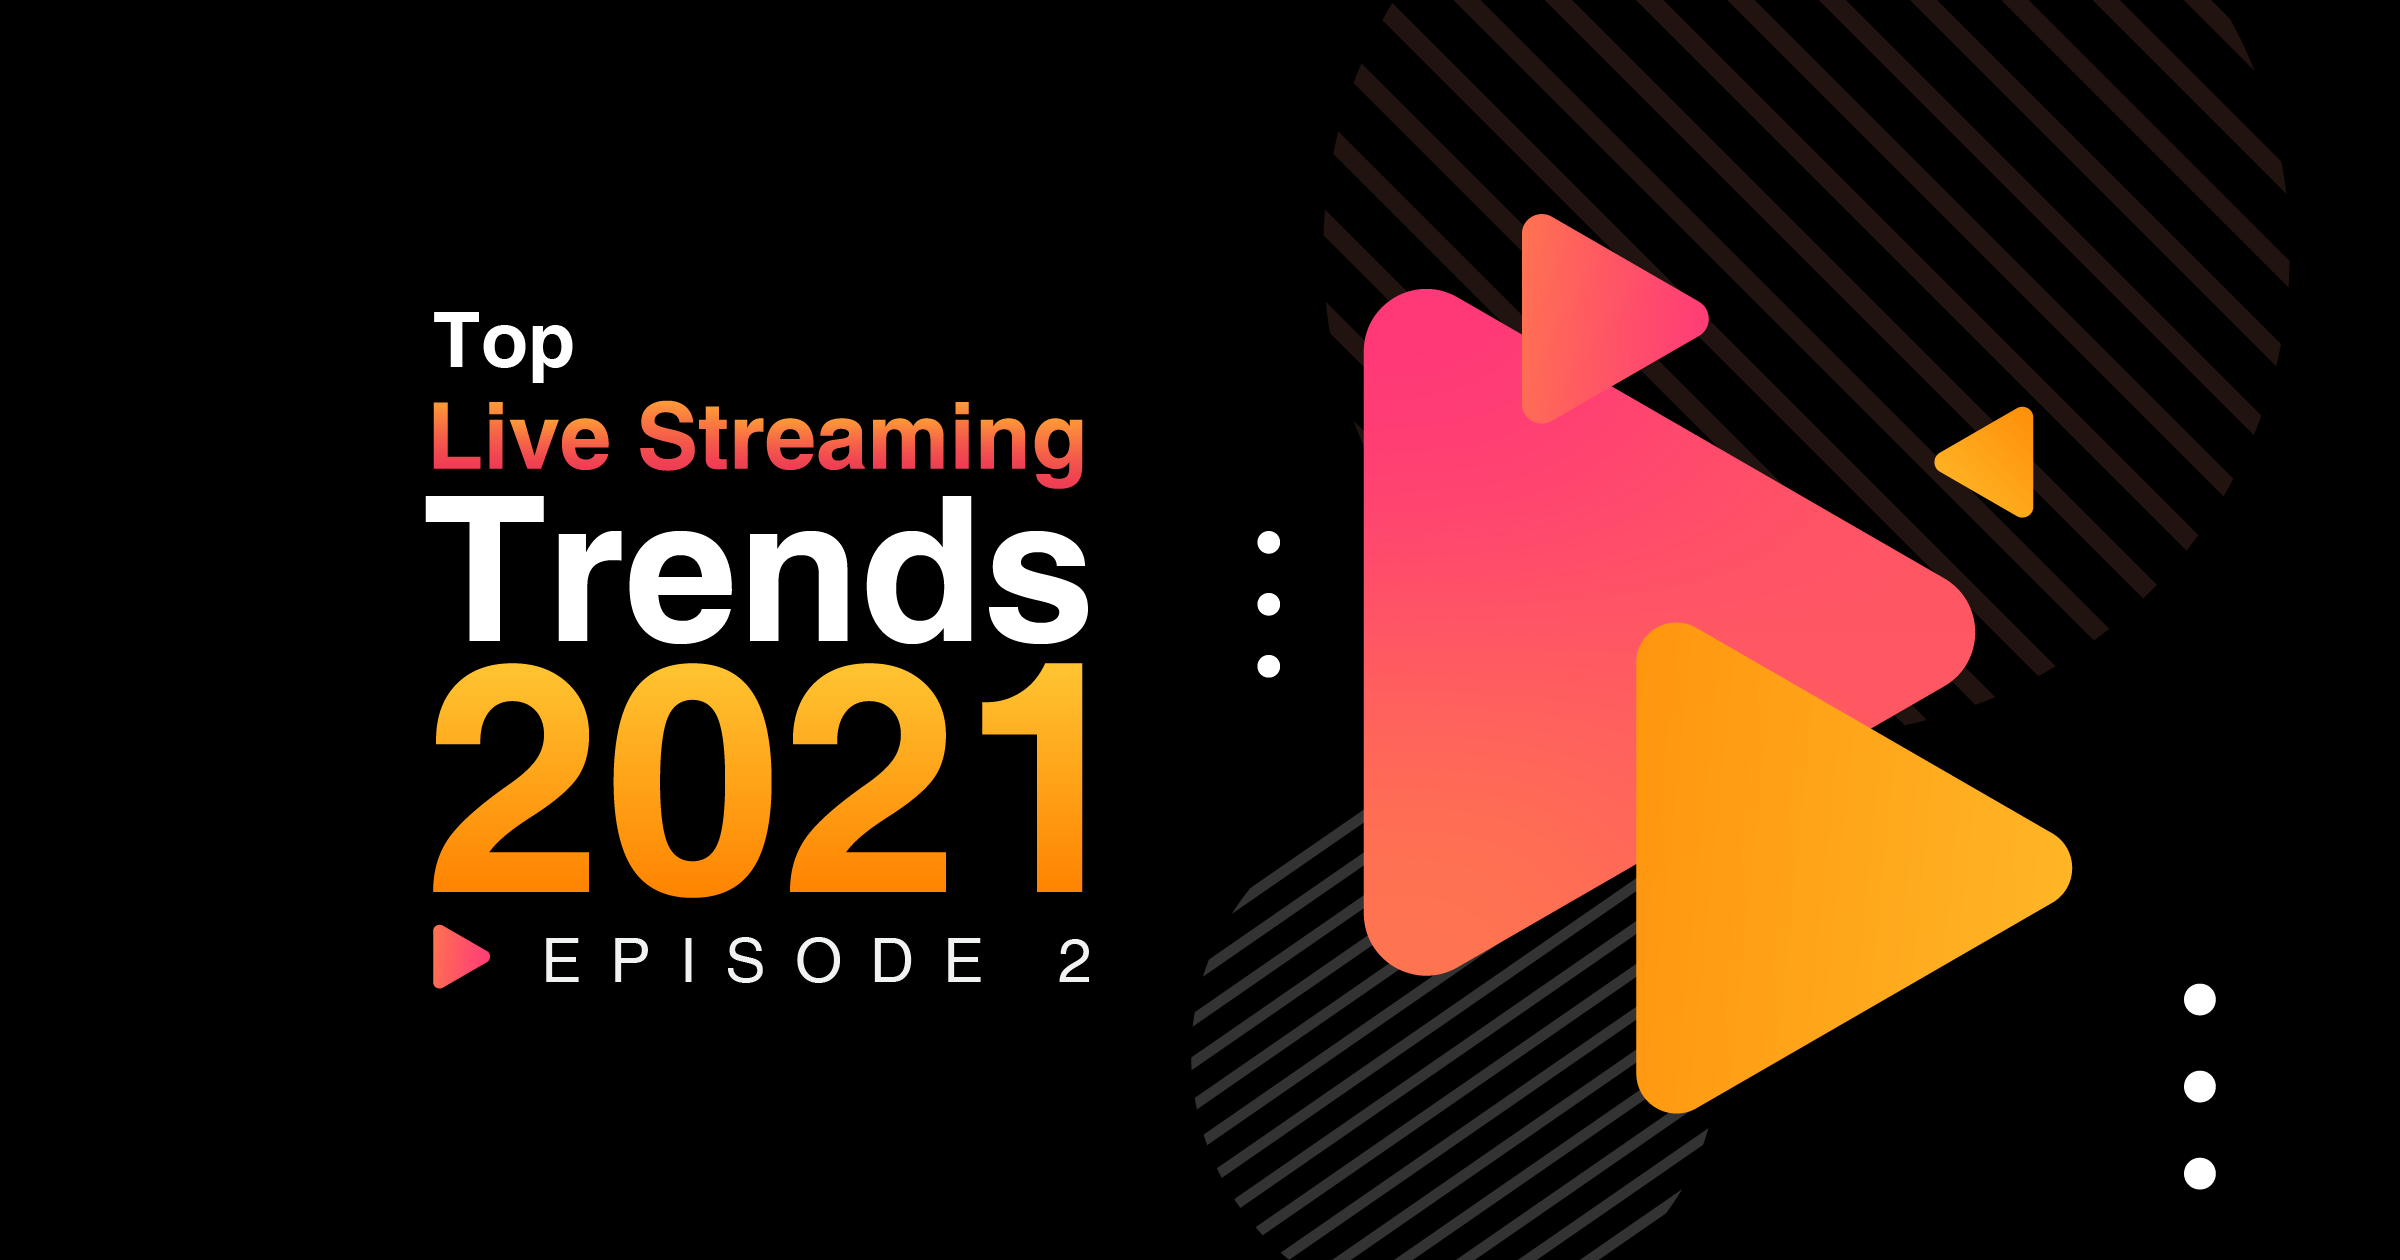 Top Live Streaming Trends to Watch Out for in 2021 – Episode 2